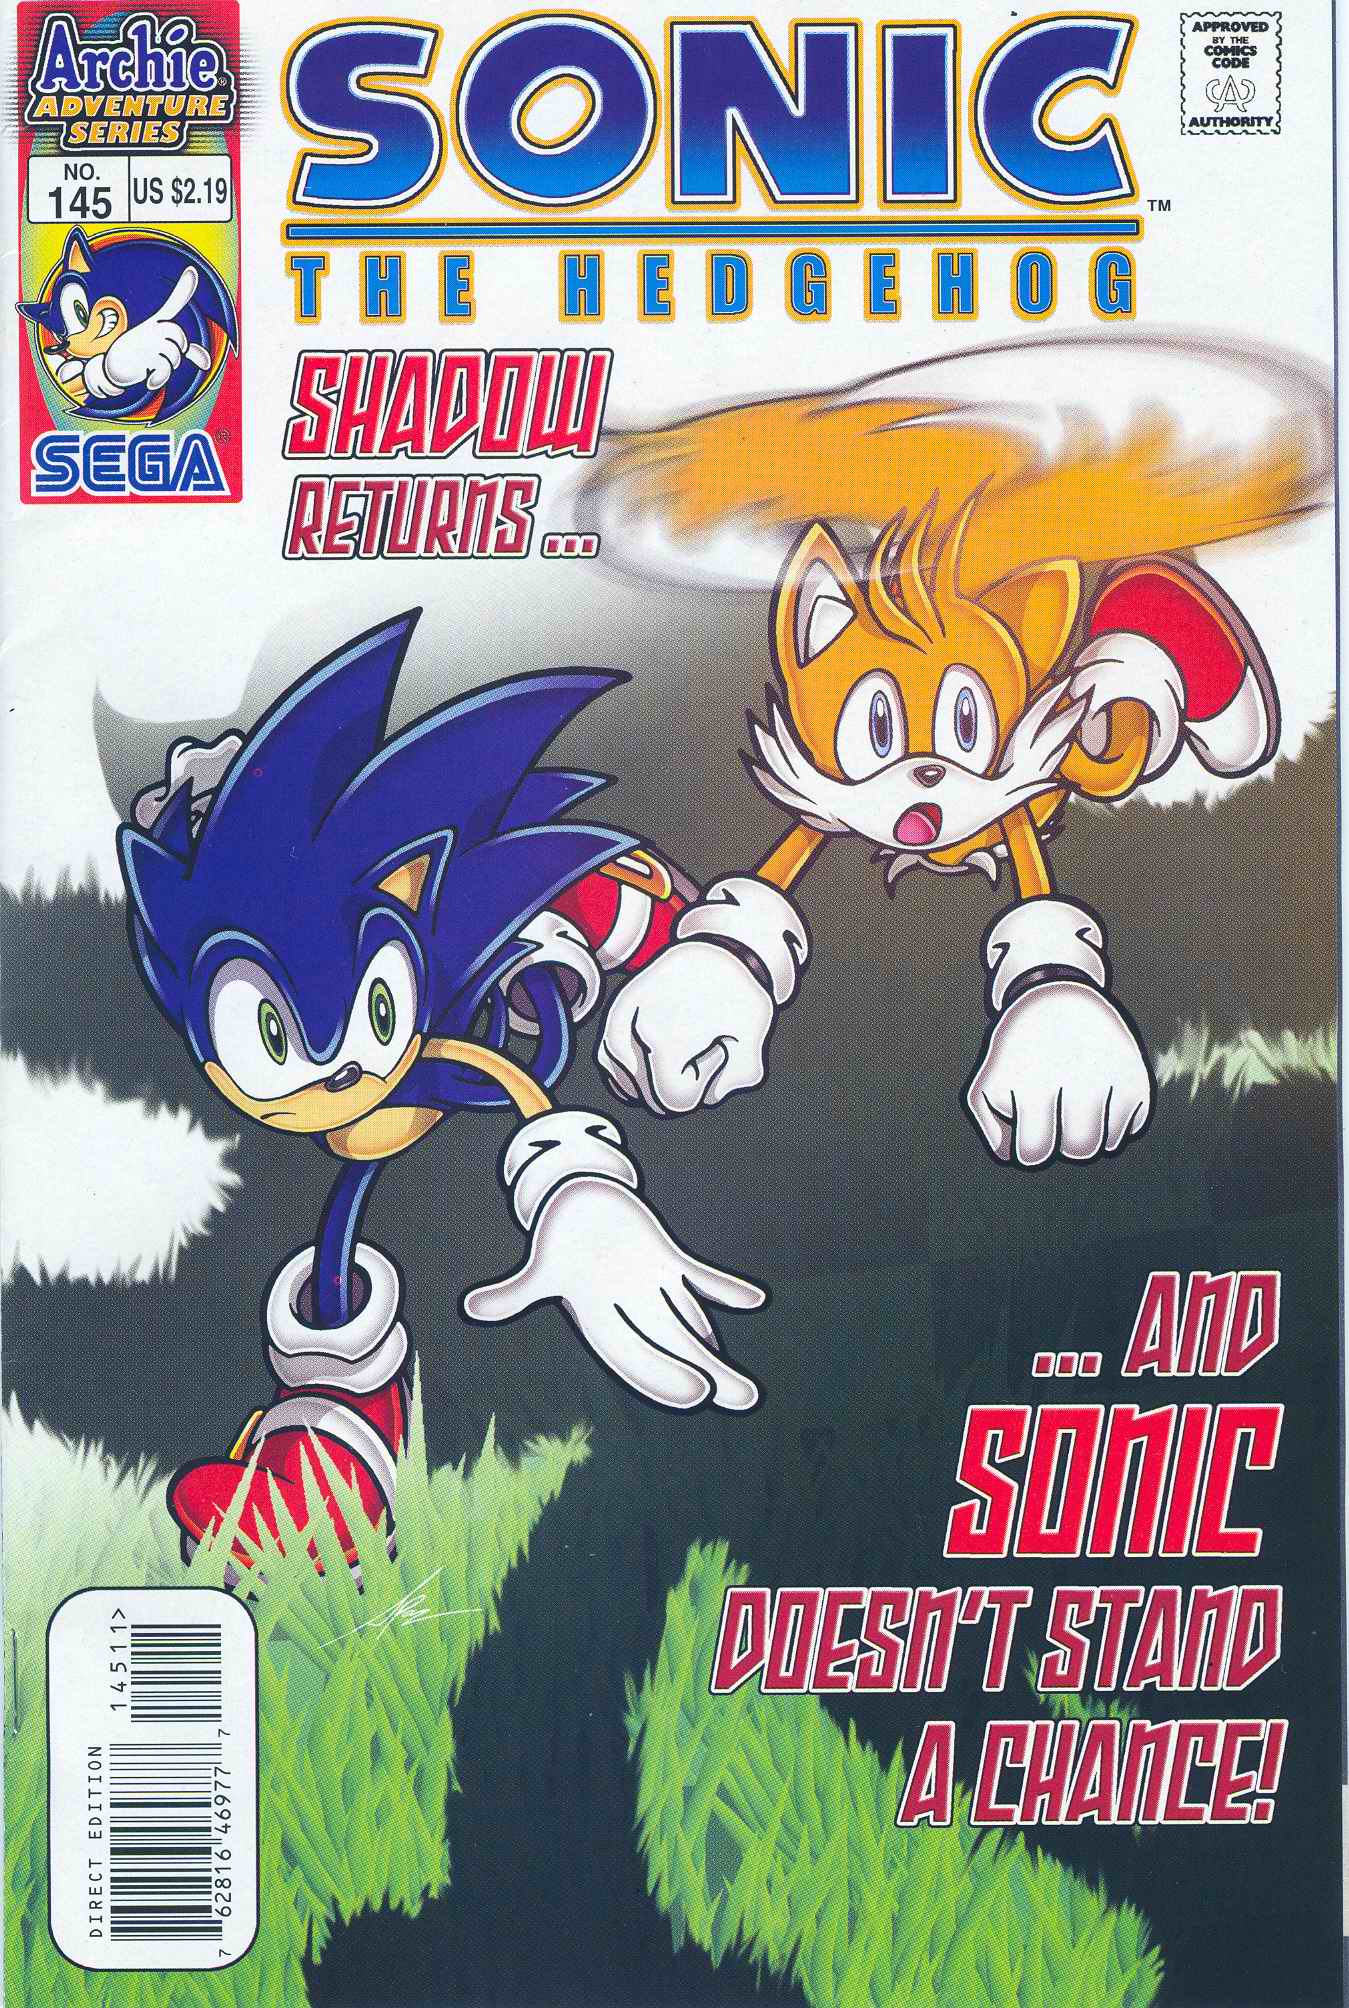 Sonic - Archie Adventure Series March 2005 Comic cover page